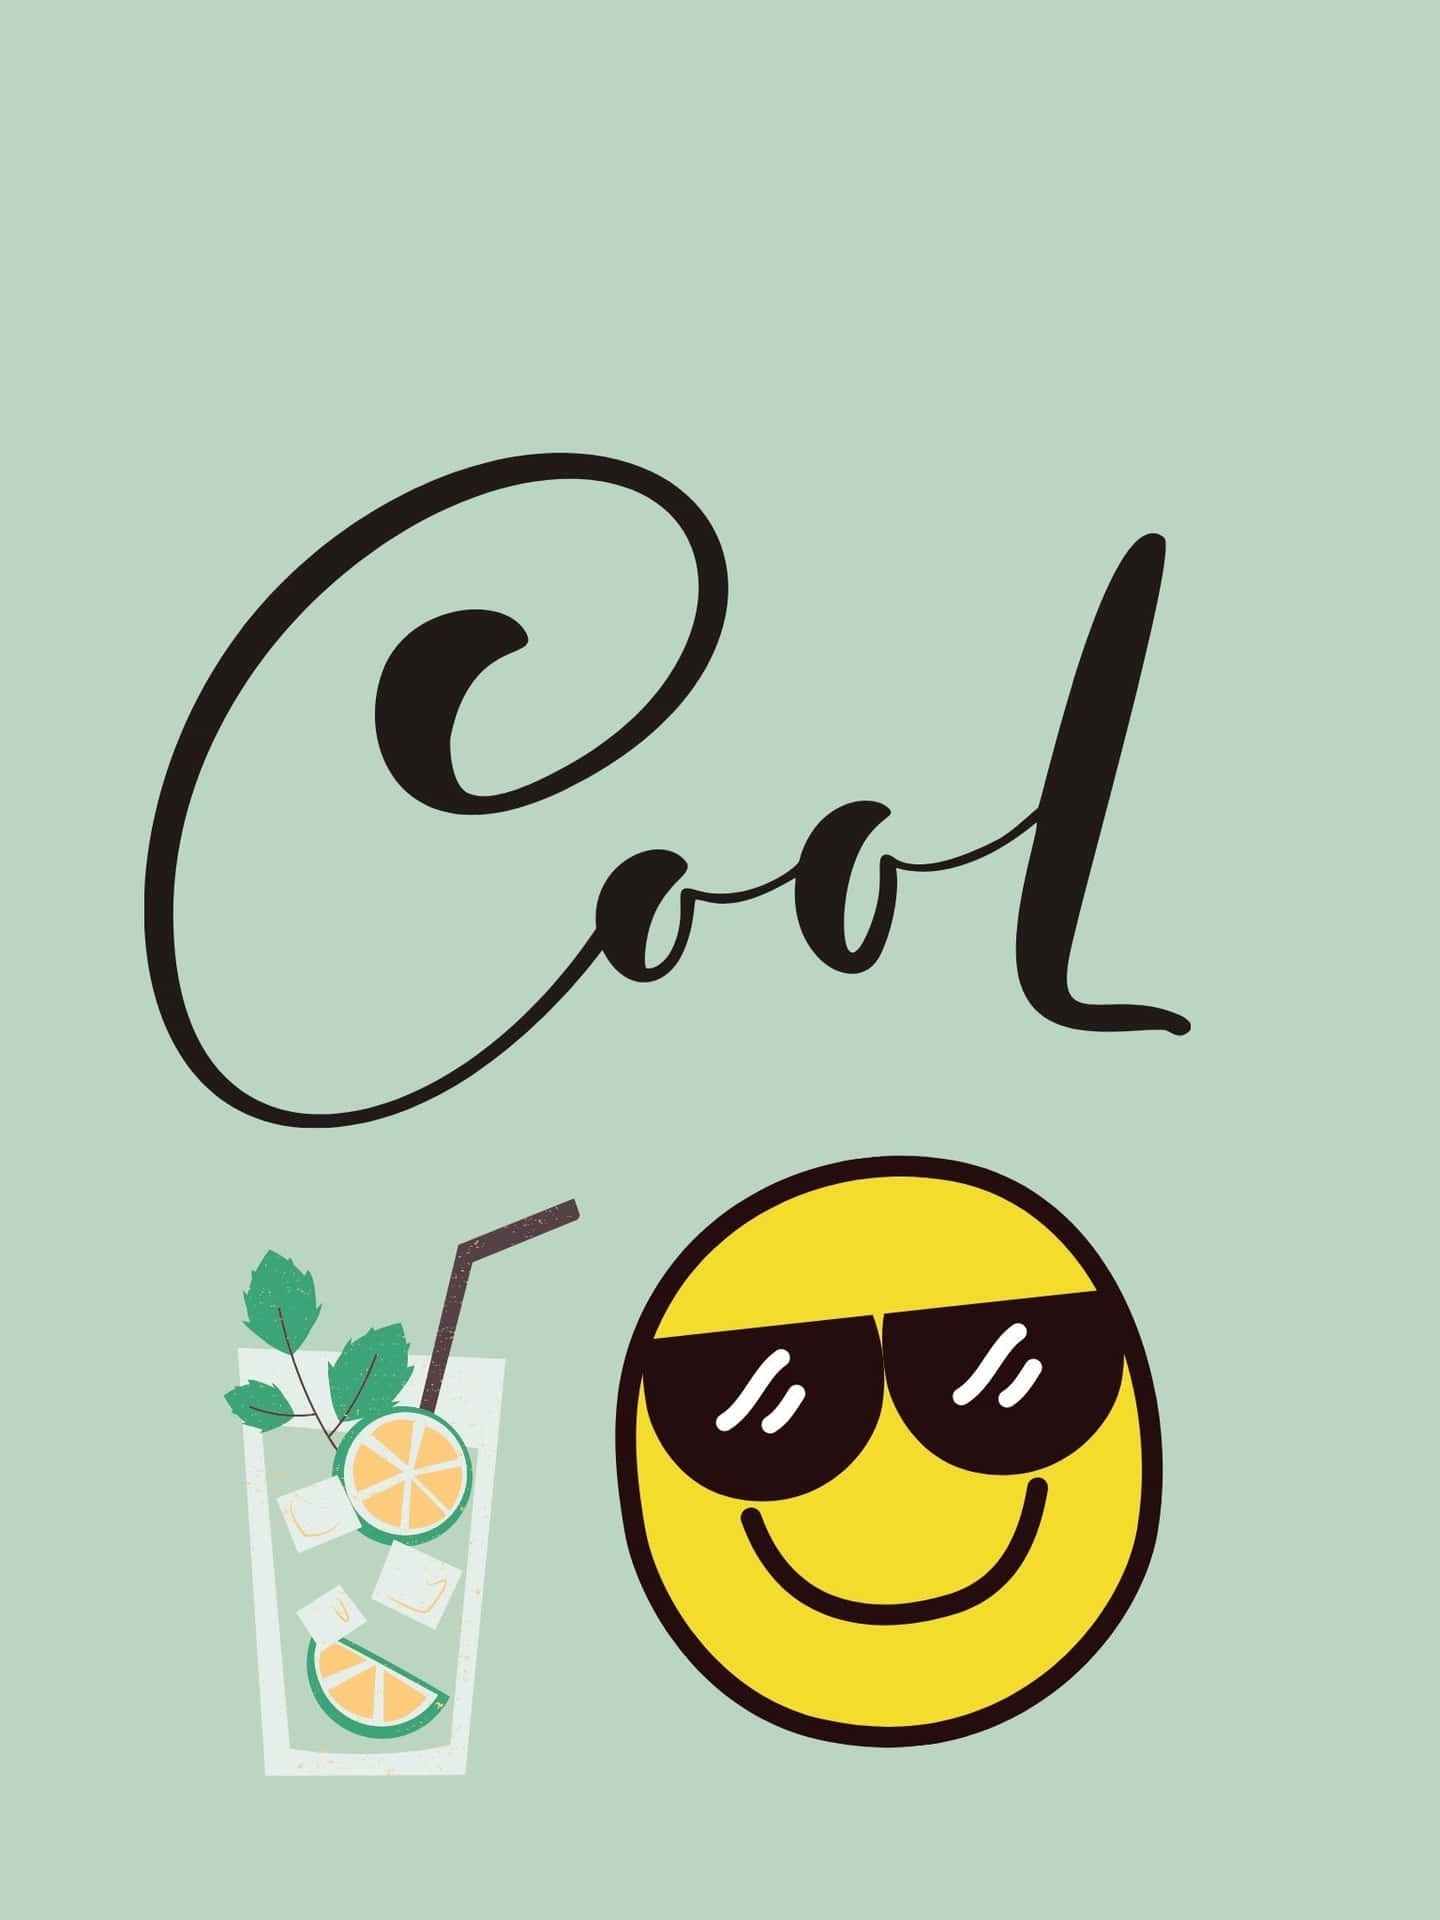 Be Cool Background